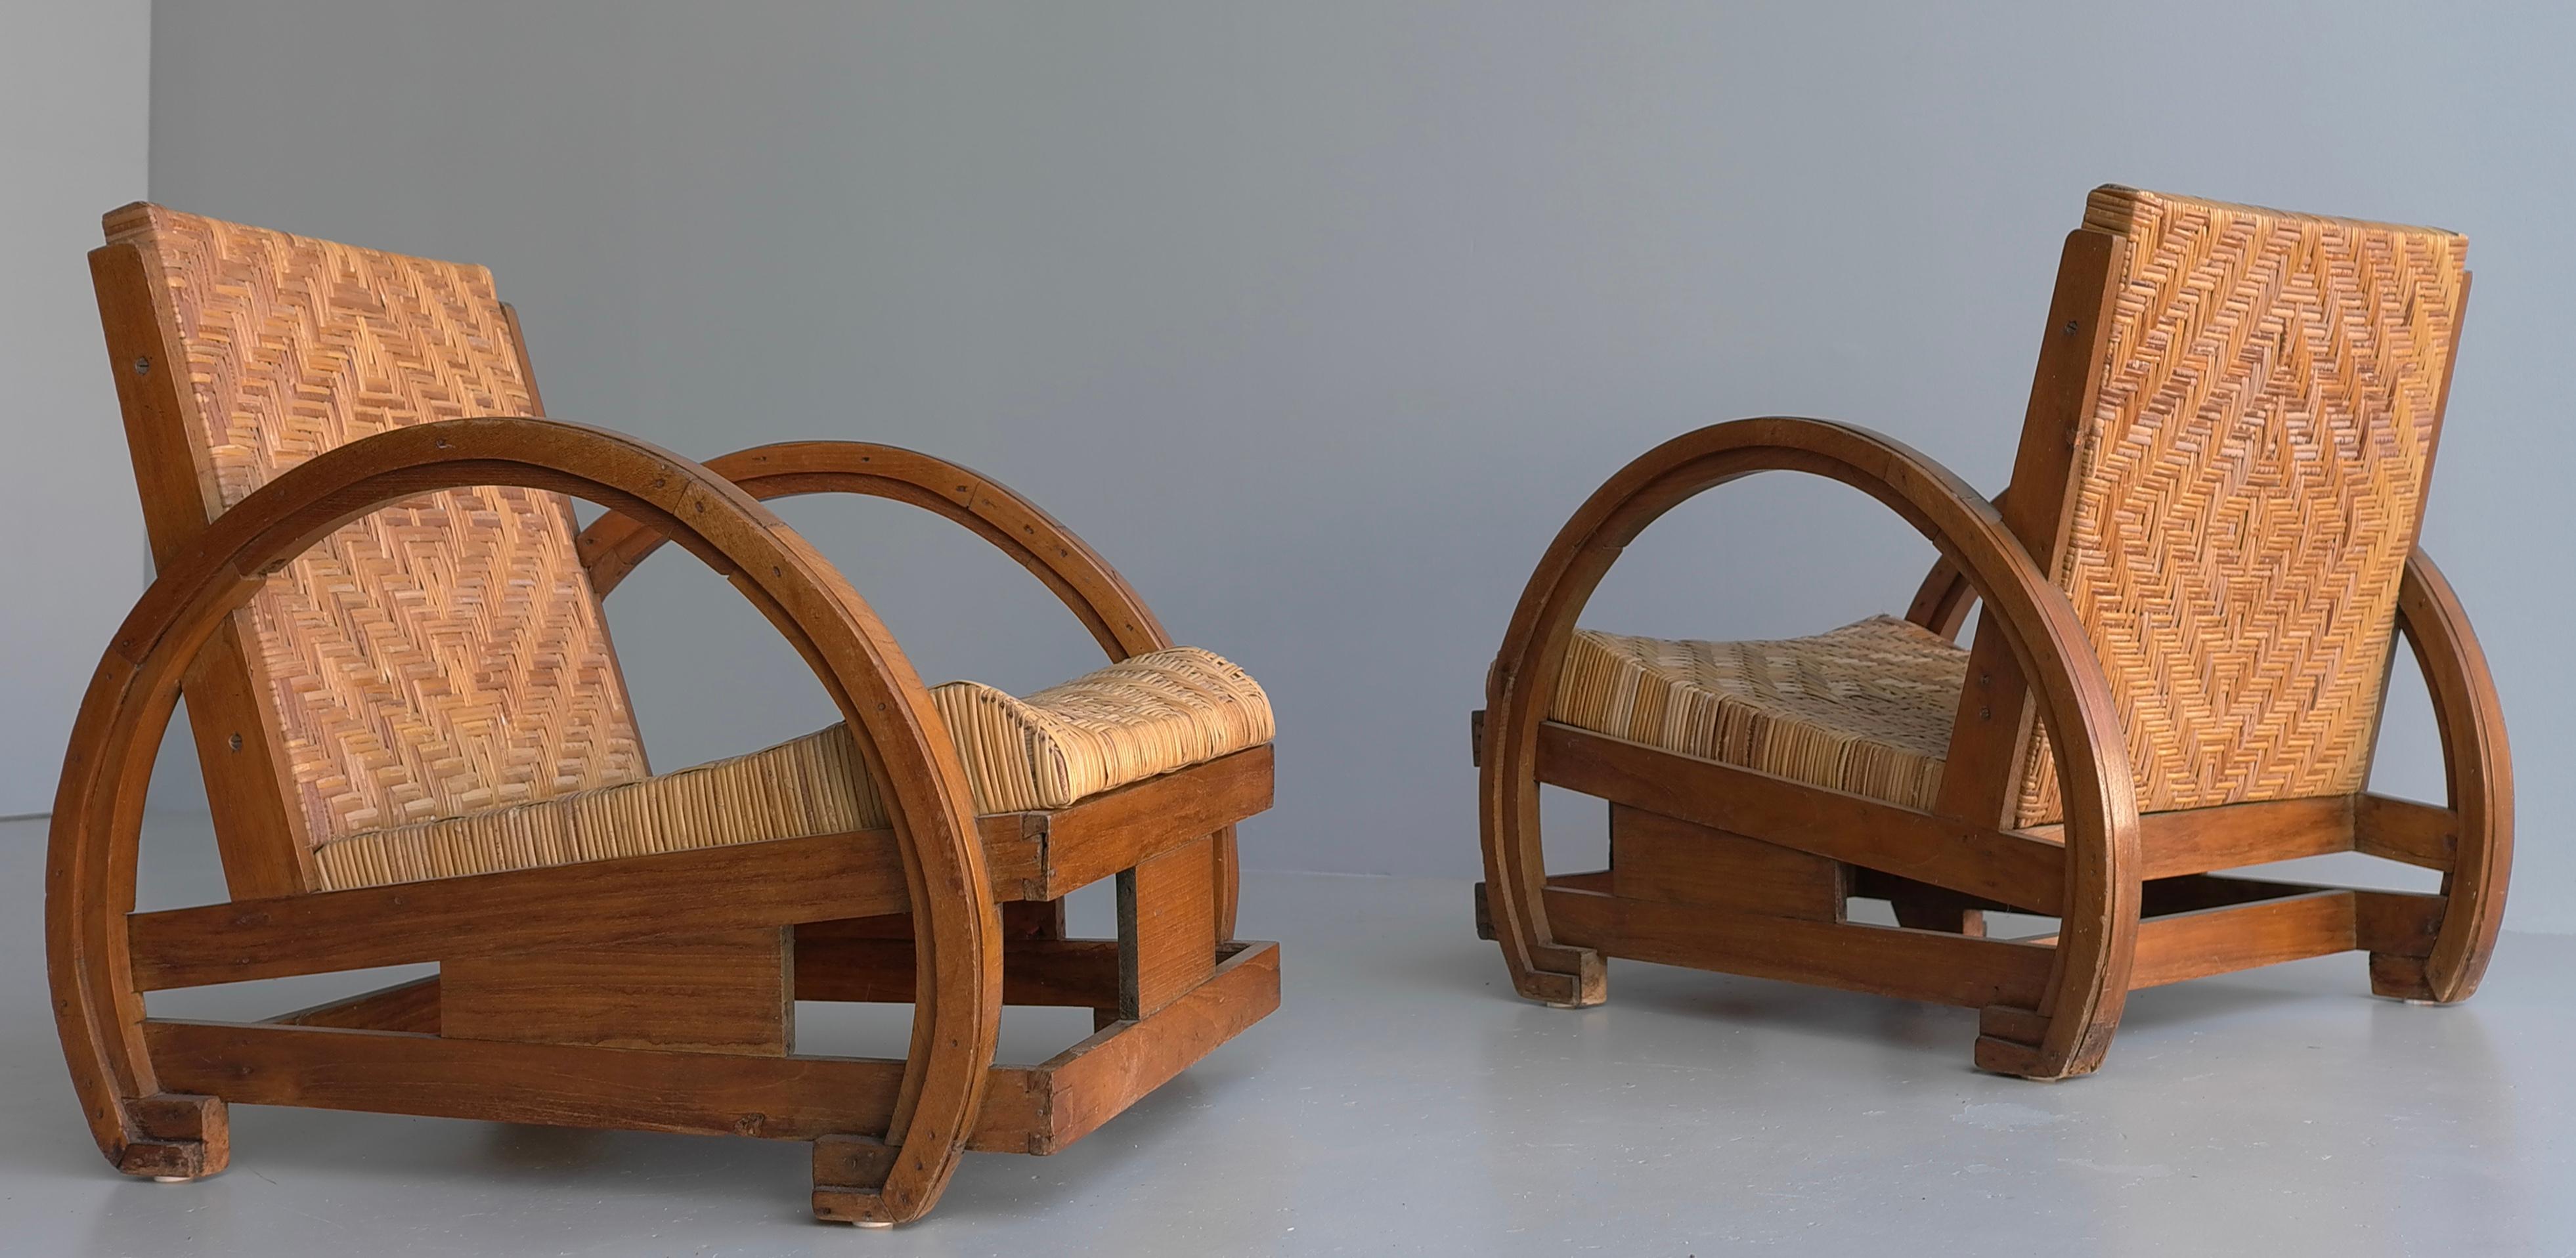 Pair Of Sculptural Art Deco Armchairs in Wood with Rush seats 1930's In Good Condition For Sale In Den Haag, NL